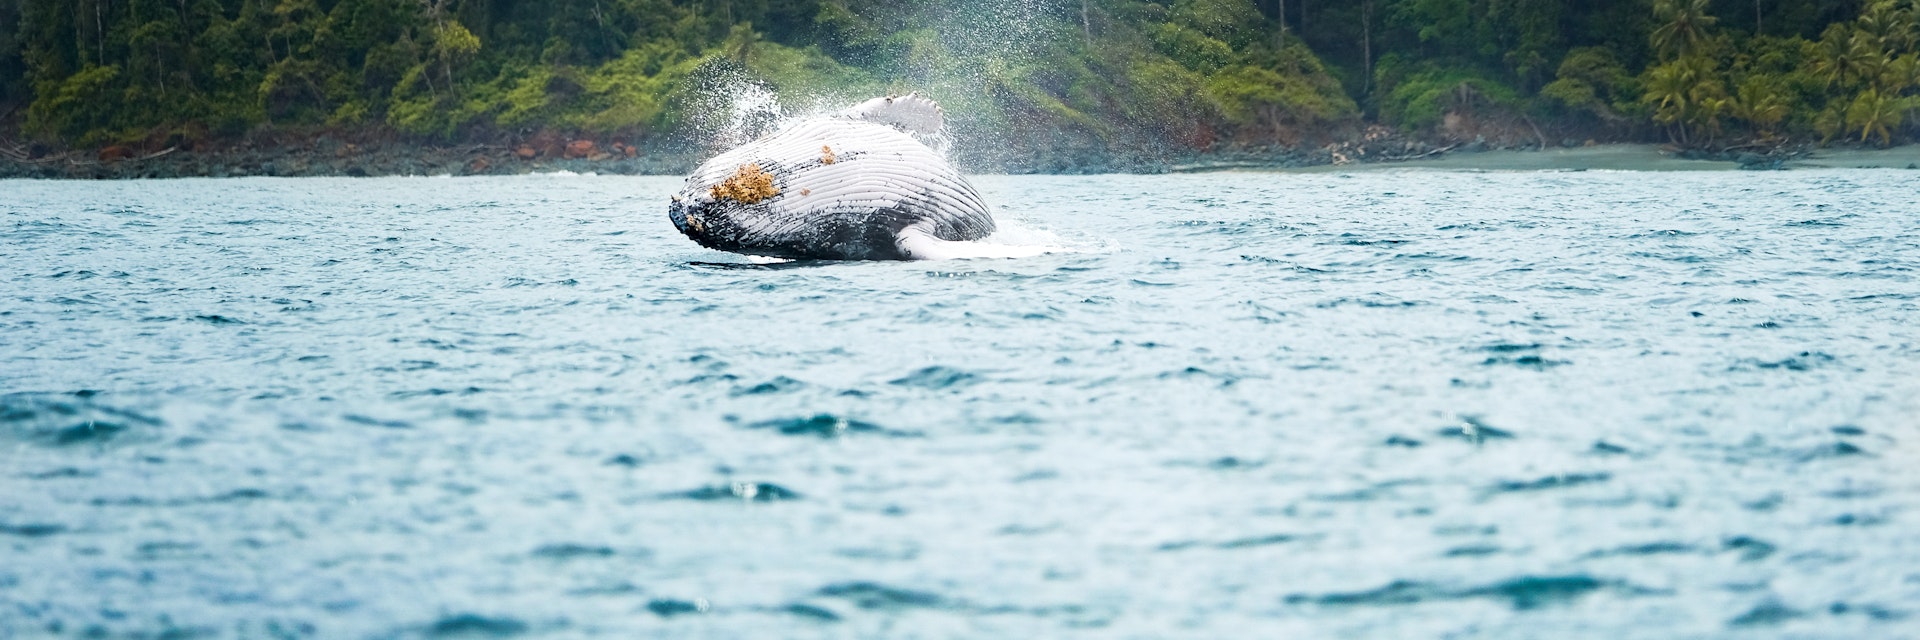 A Humpback whale jumping near the shore of Gorgona Island in the Colombian Pacific.